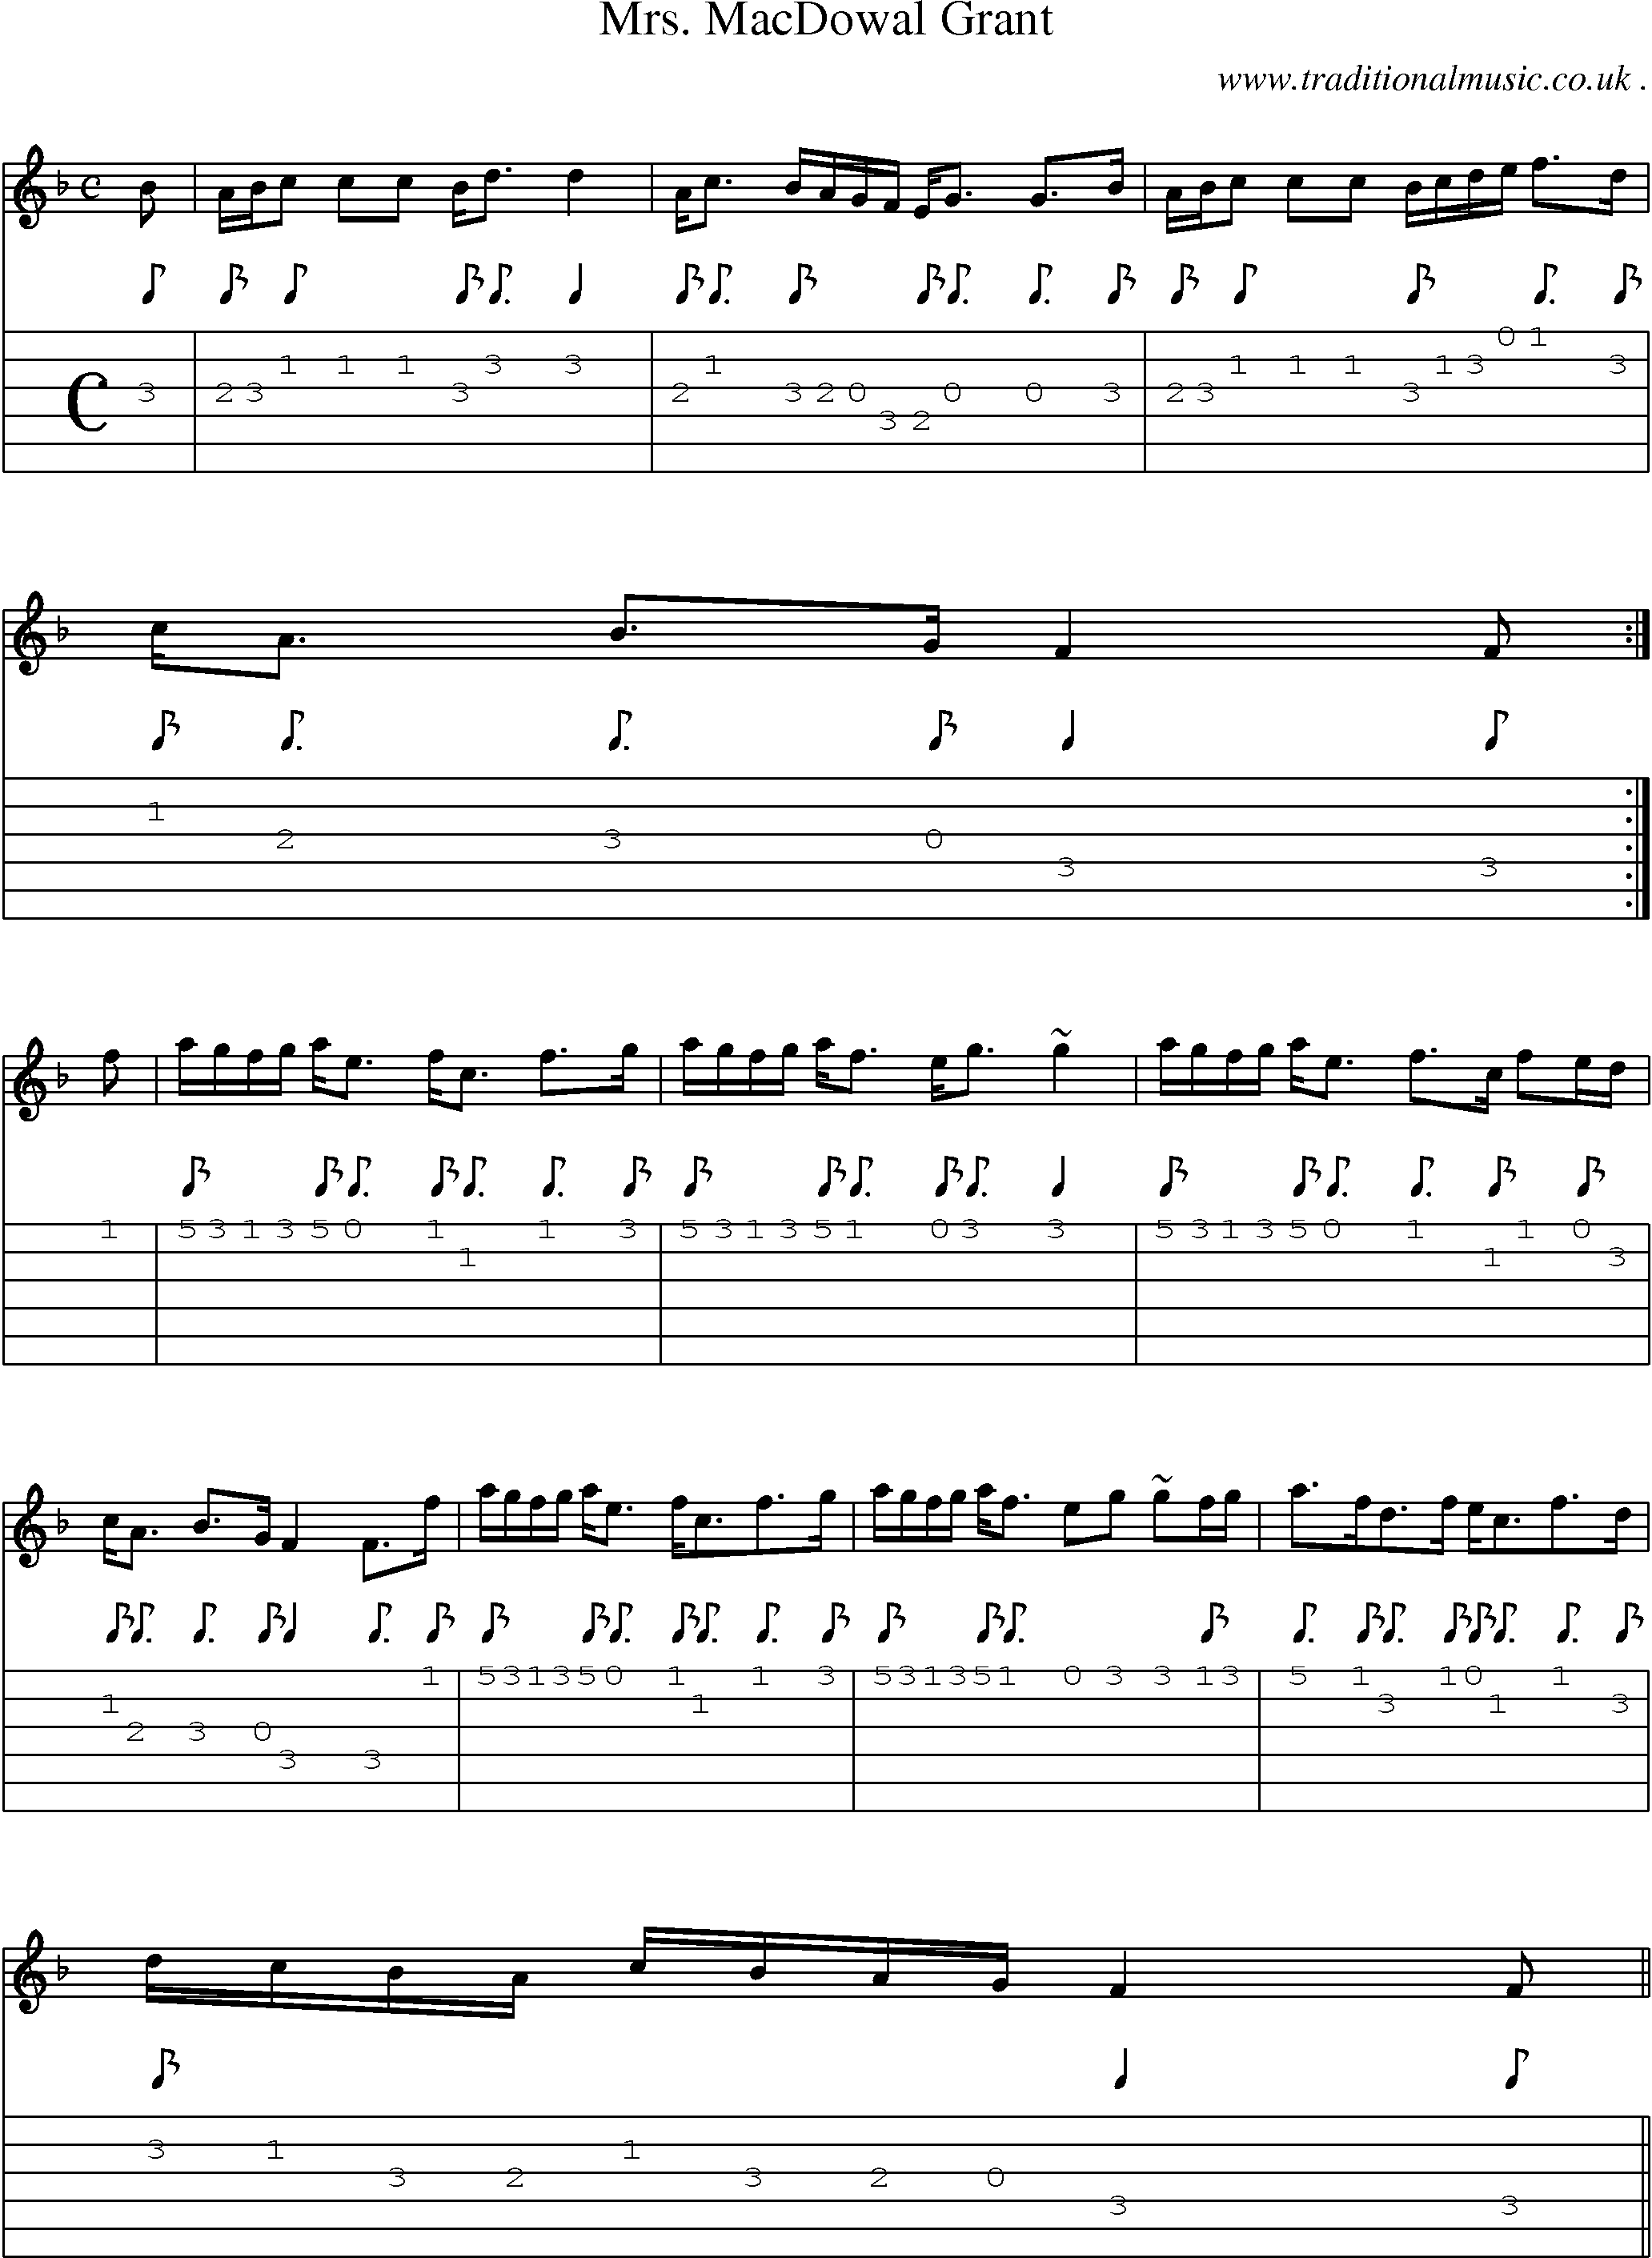 Sheet-music  score, Chords and Guitar Tabs for Mrs Macdowal Grant